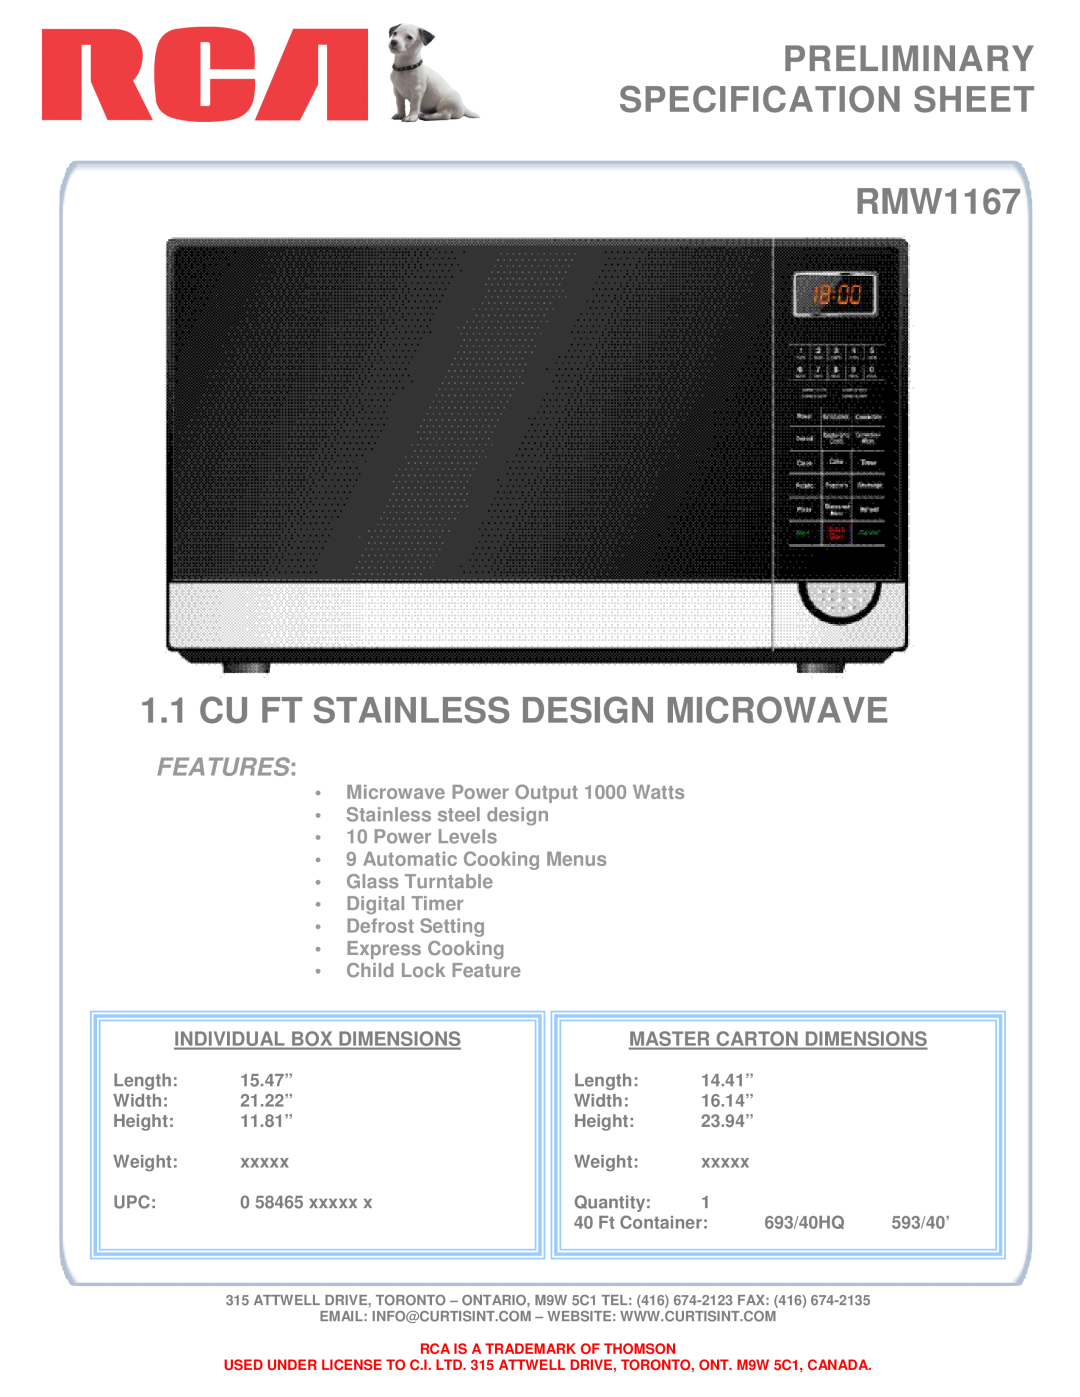 RCA specifications PRELIMINARY SPECIFICATION SHEET RMW1167, Cu Ft Stainless Design Microwave, Features 